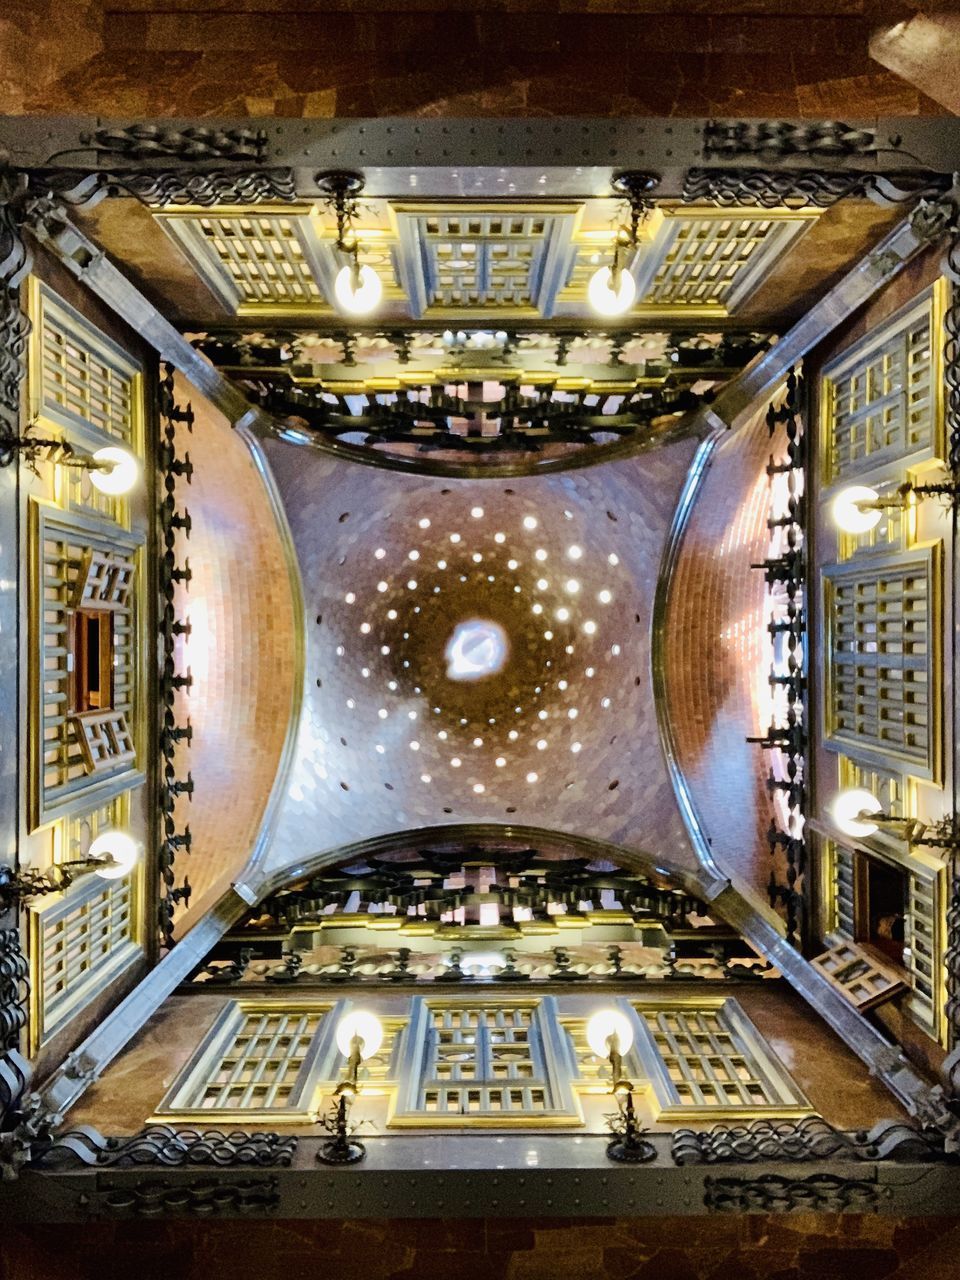 LOW ANGLE VIEW OF ILLUMINATED CEILING